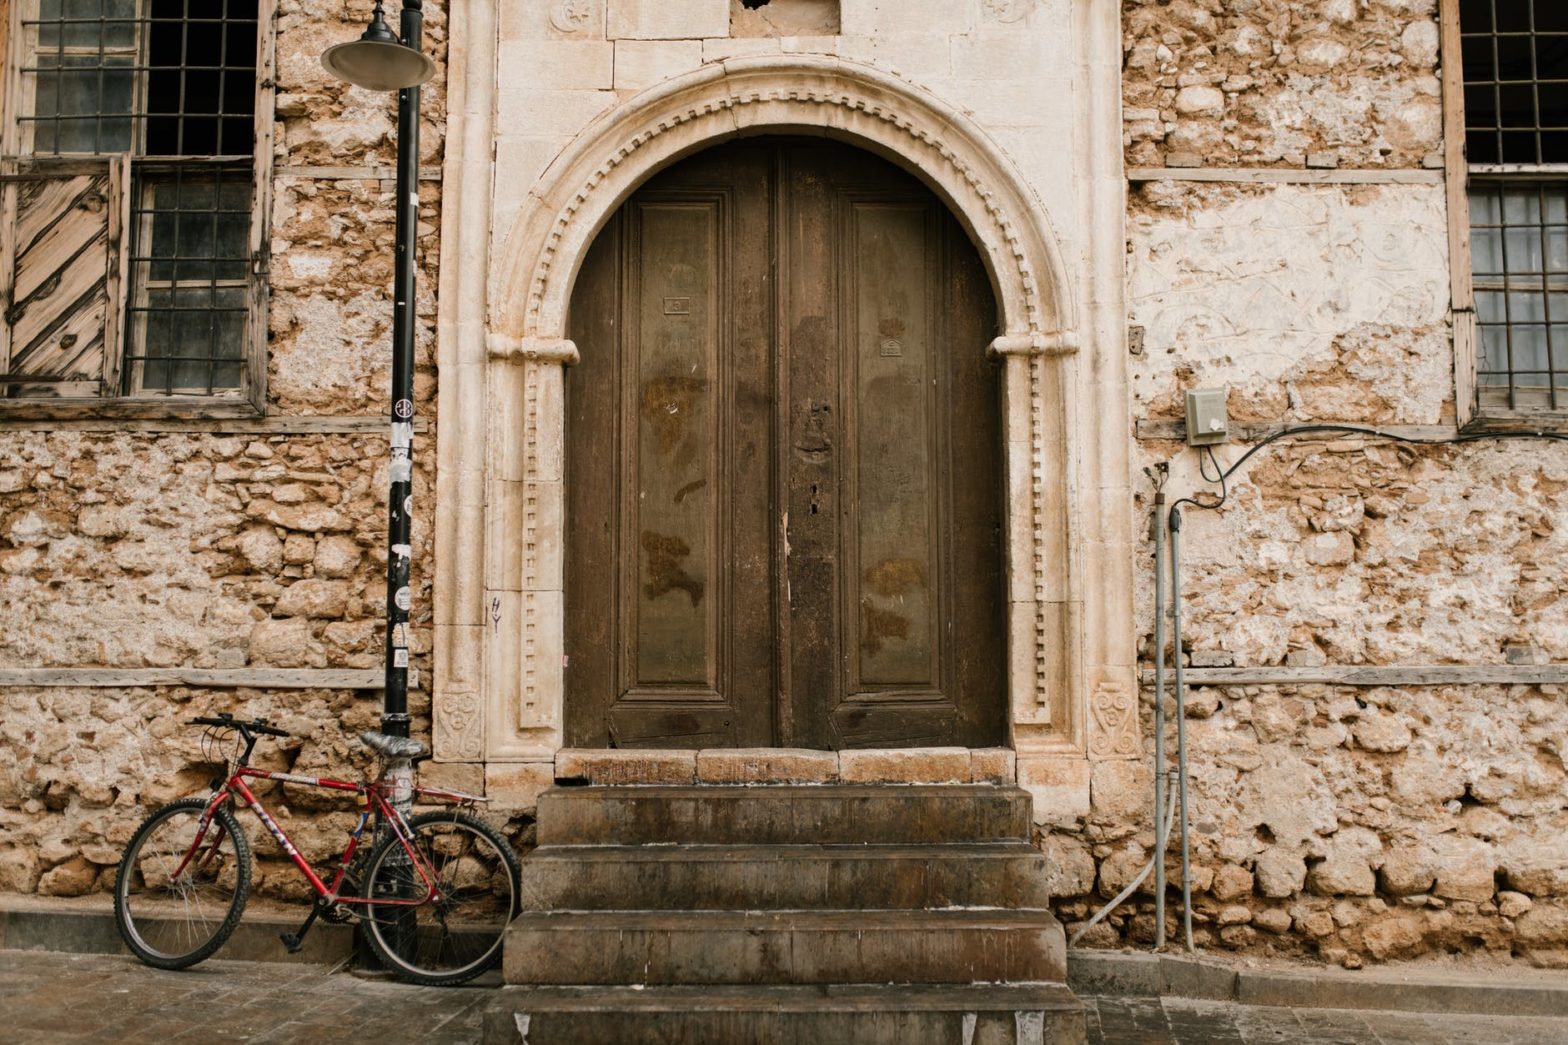 old stone building with arched wooden door